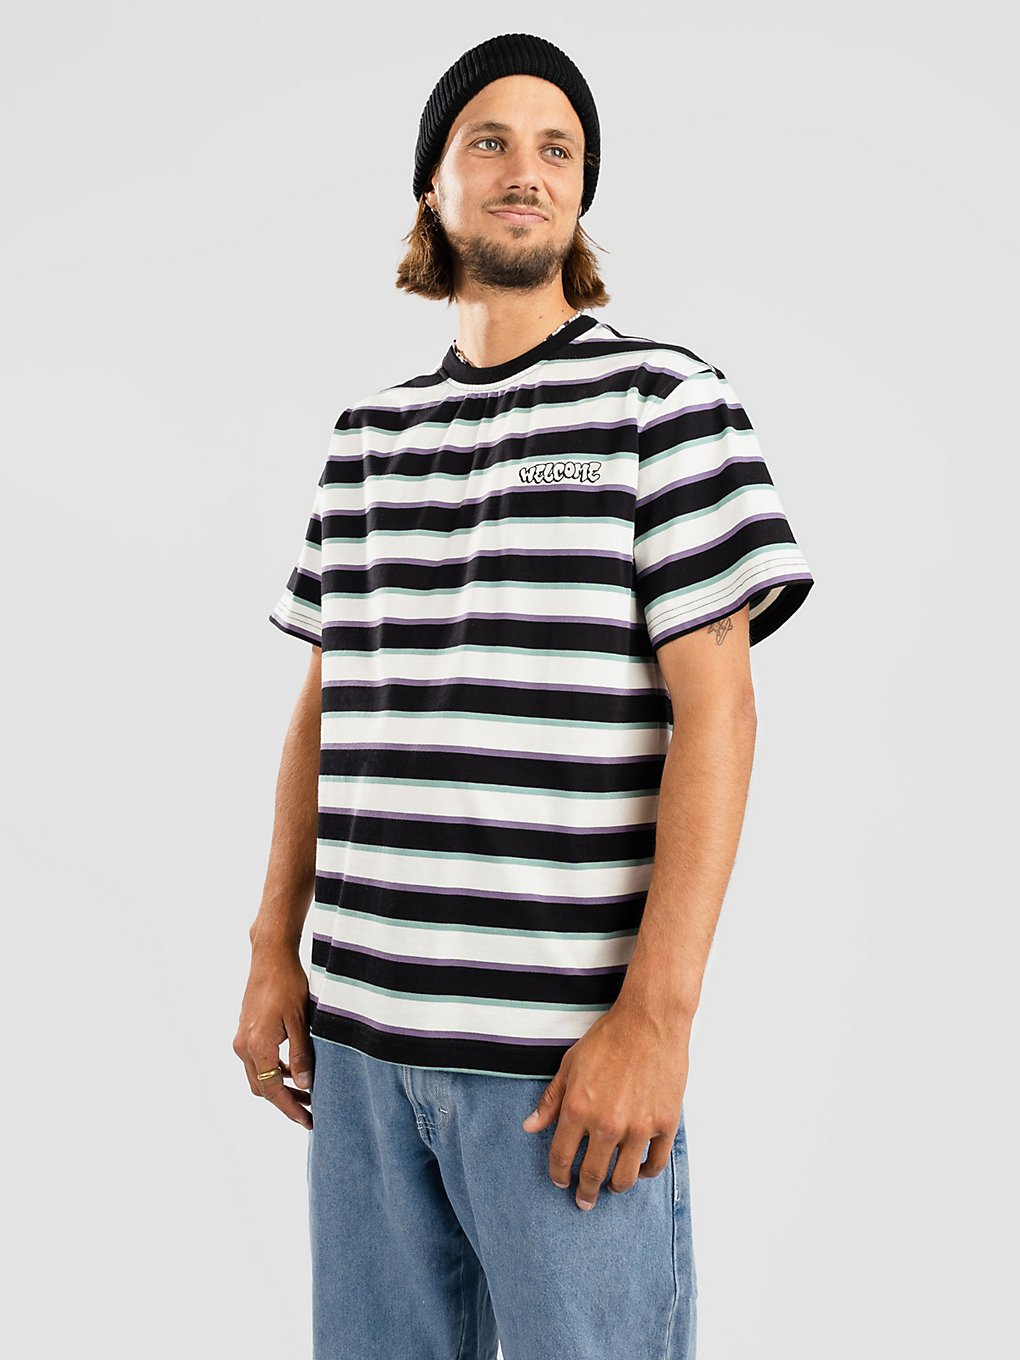 Welcome Cooper Striped Yarn-Dyed T-Shirt patroon